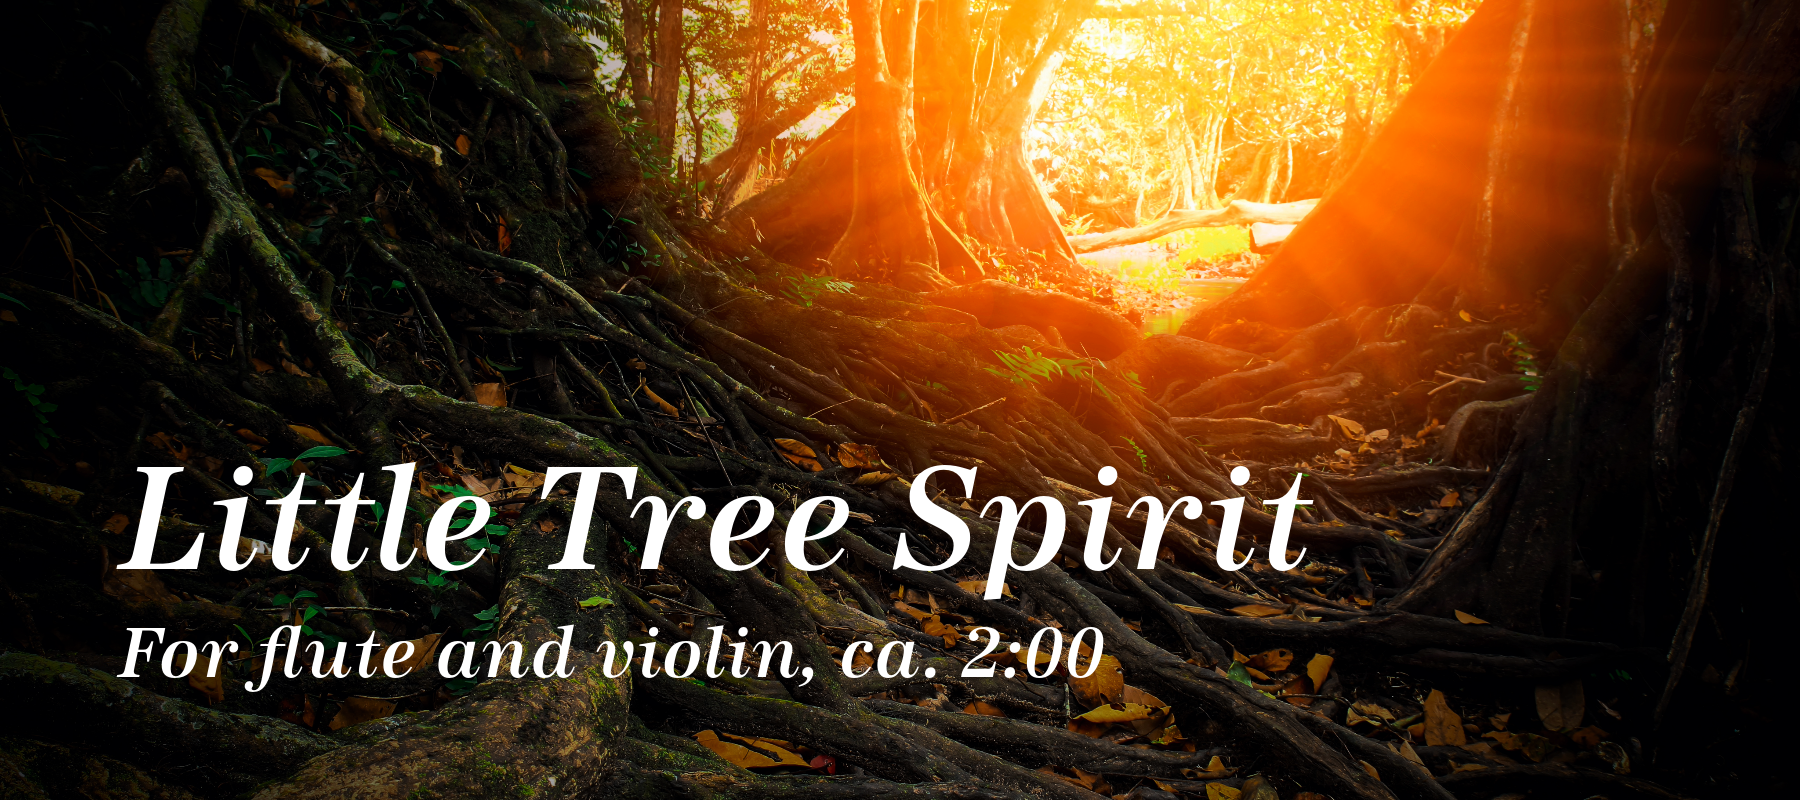 Little Tree Spirit, for flute and violin, ca. 2:00